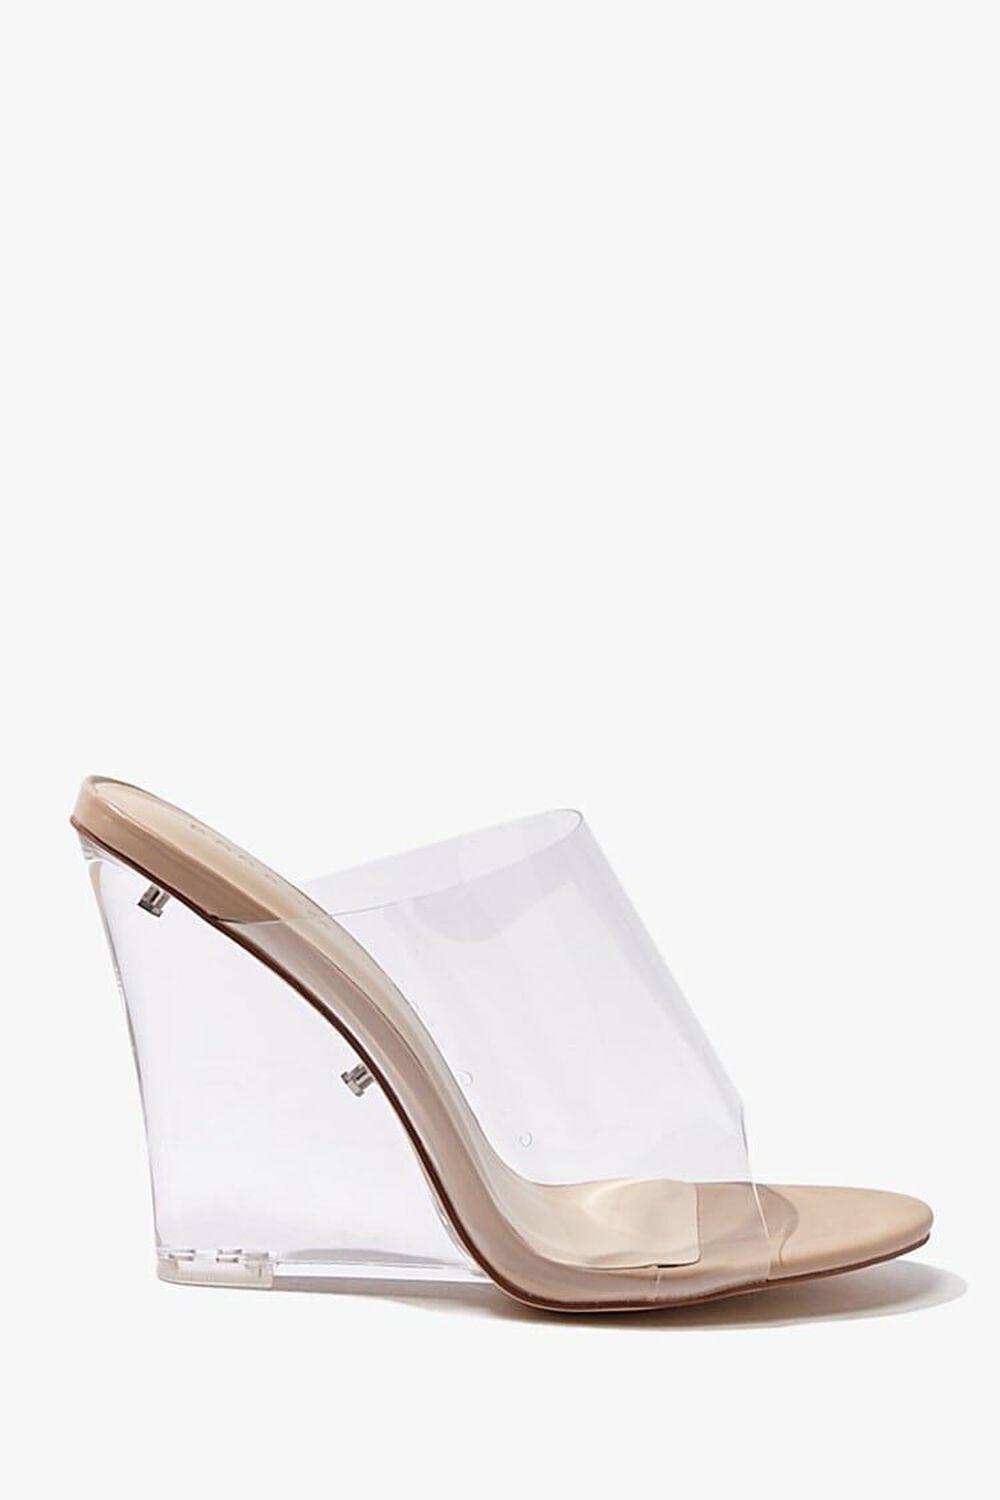 Almond Toe Lucite Wedges